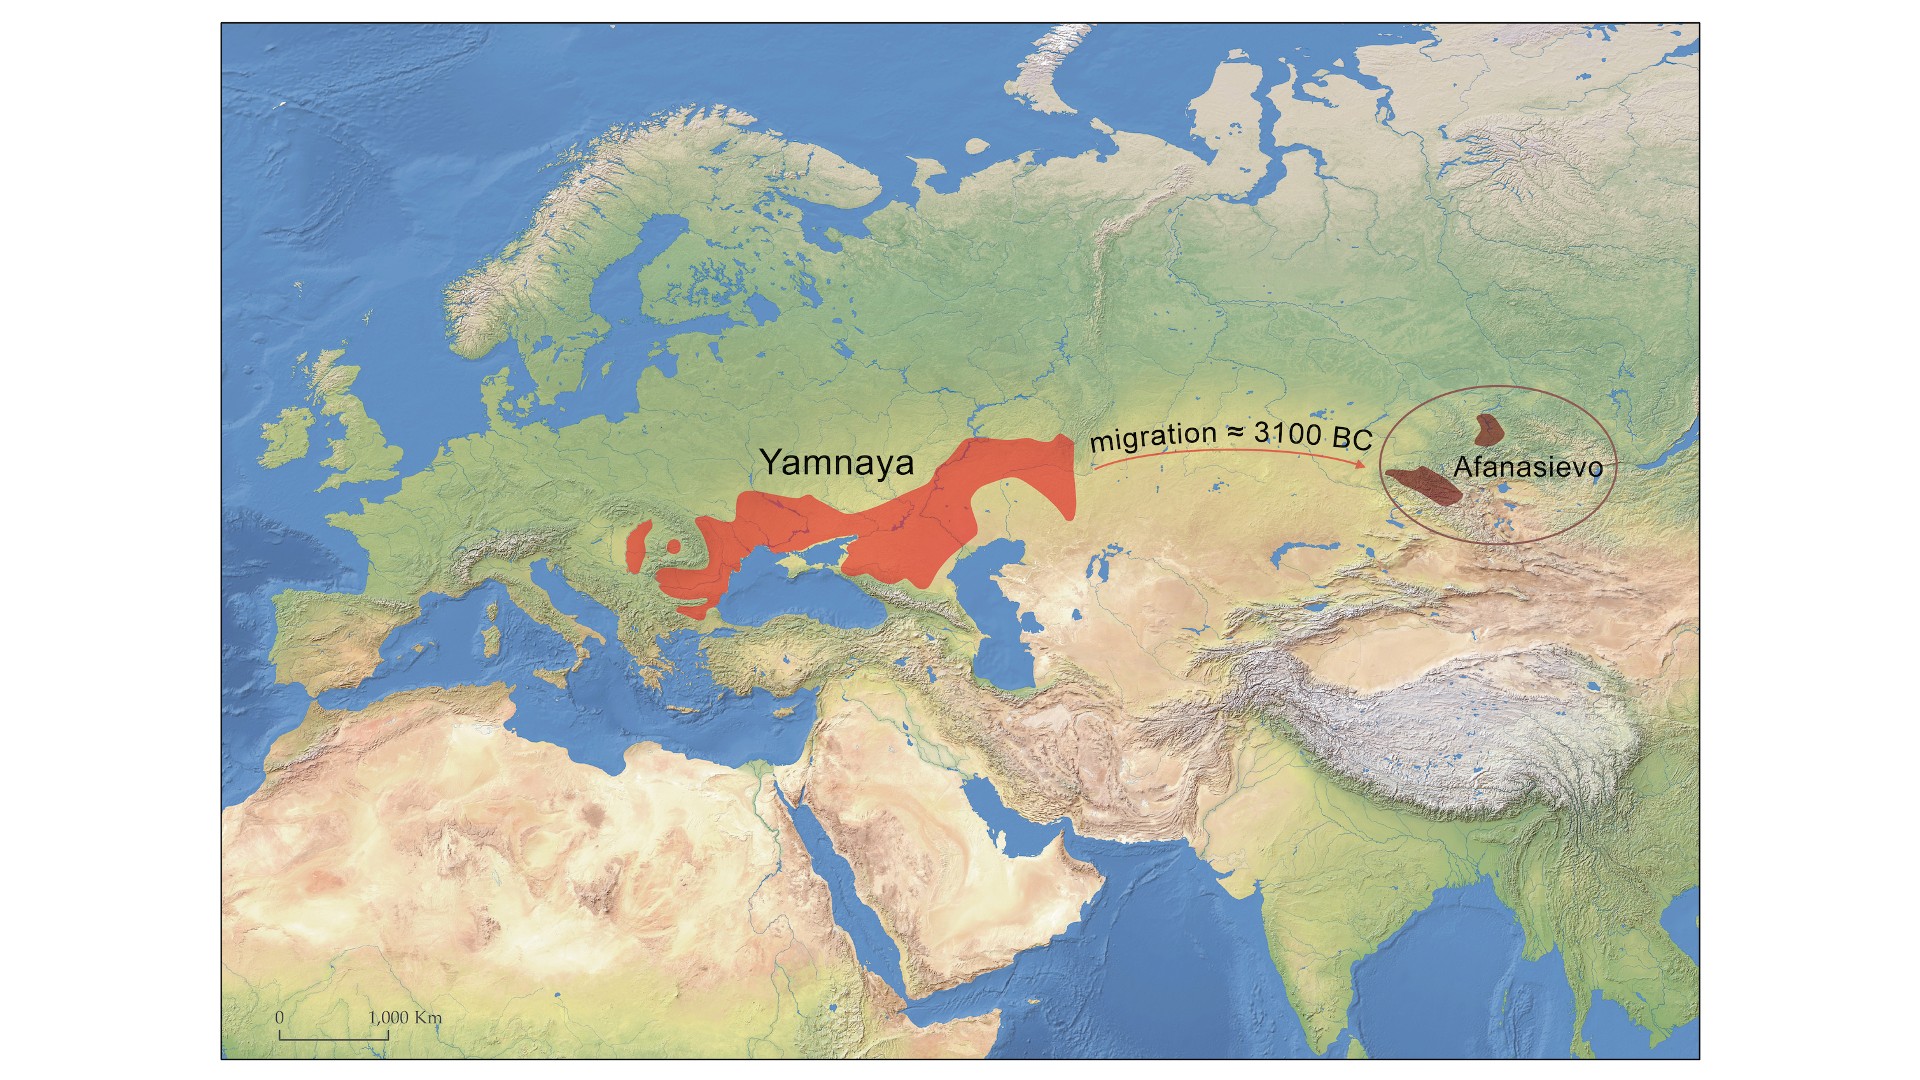 A map of the Yamnaya and Afanasievo distribution in Eurasia about 5,000 years ago.